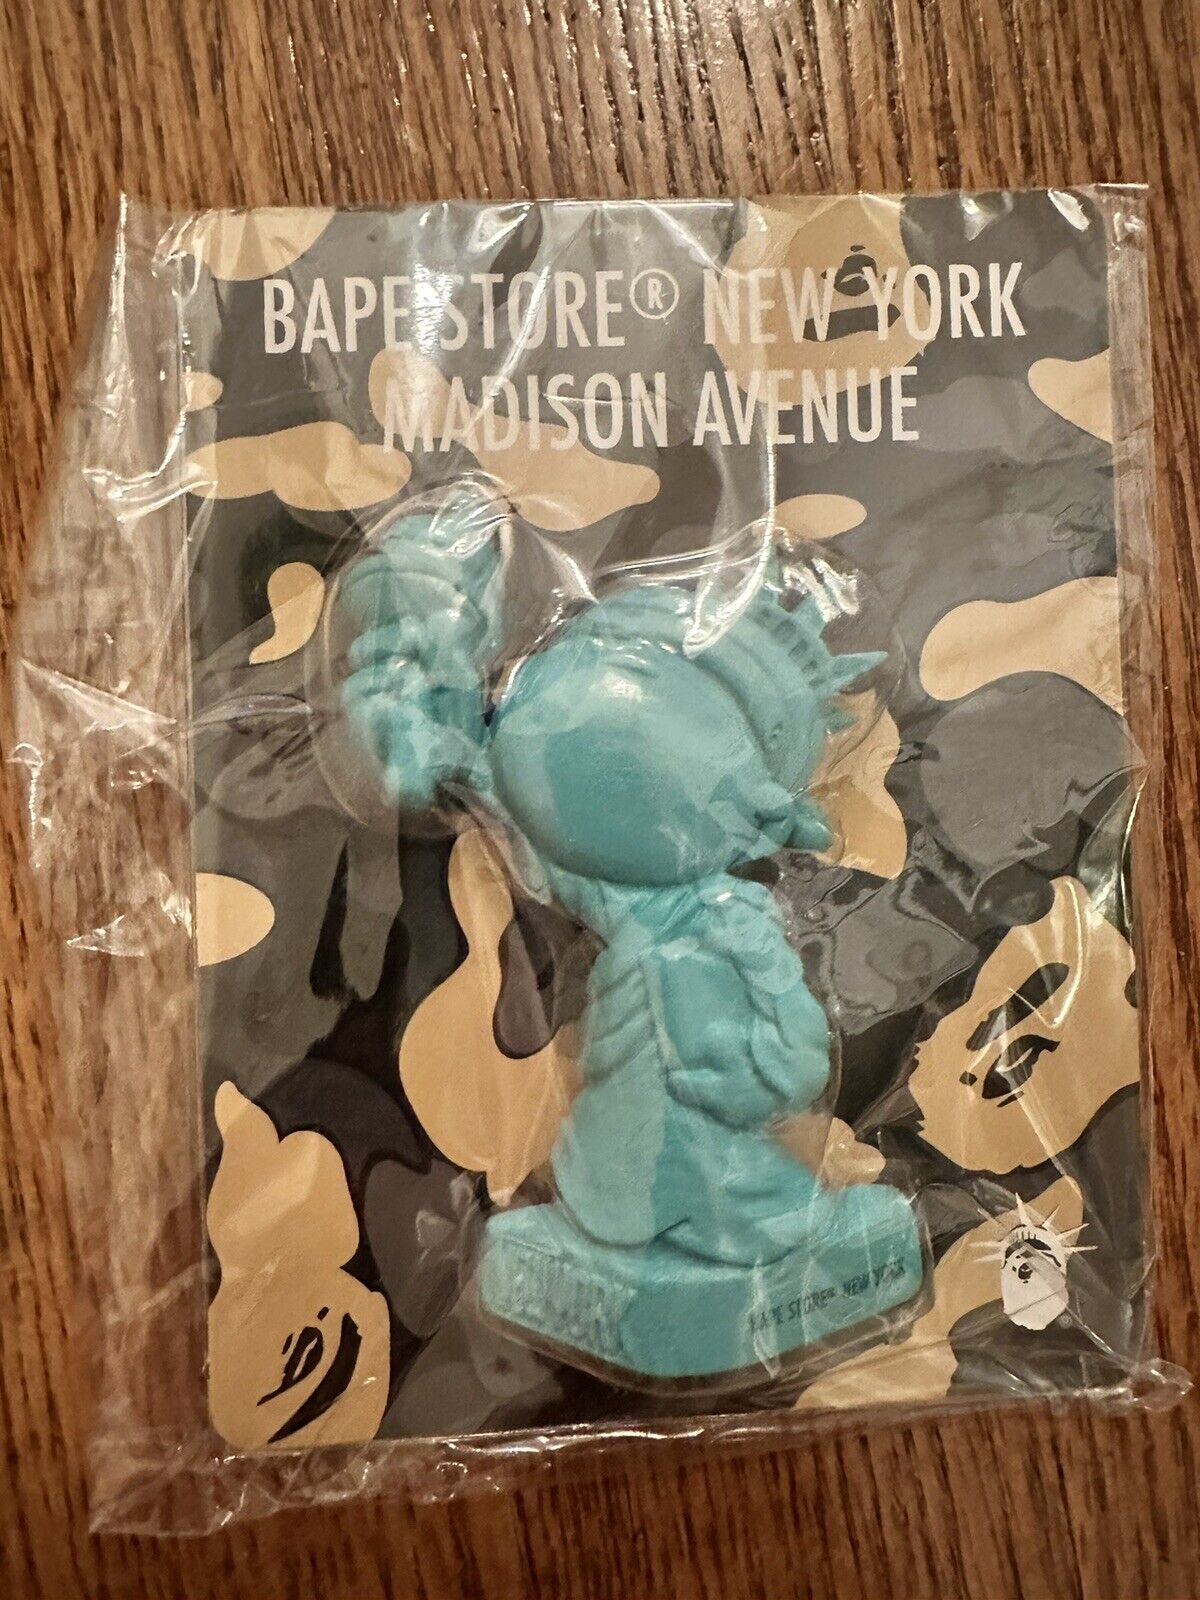 New Bape Magnet A Bathing Ape Magnet NYC Madison Store. Statue Of Liberty. Rare.